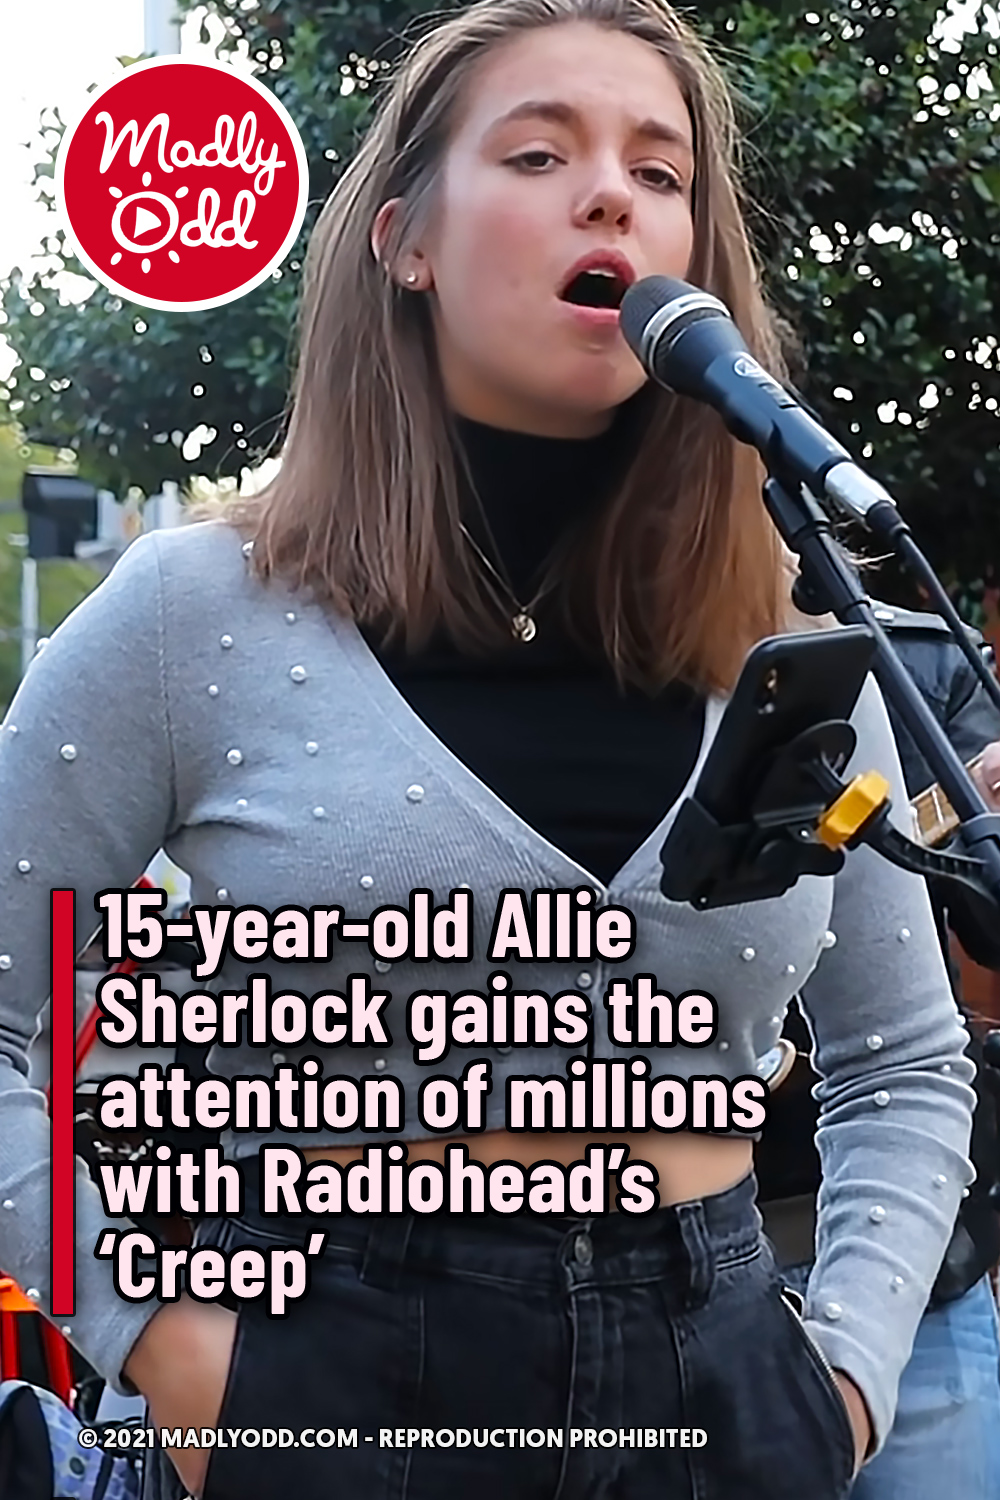 15-year-old Allie Sherlock gains the attention of millions with Radiohead’s ‘Creep’